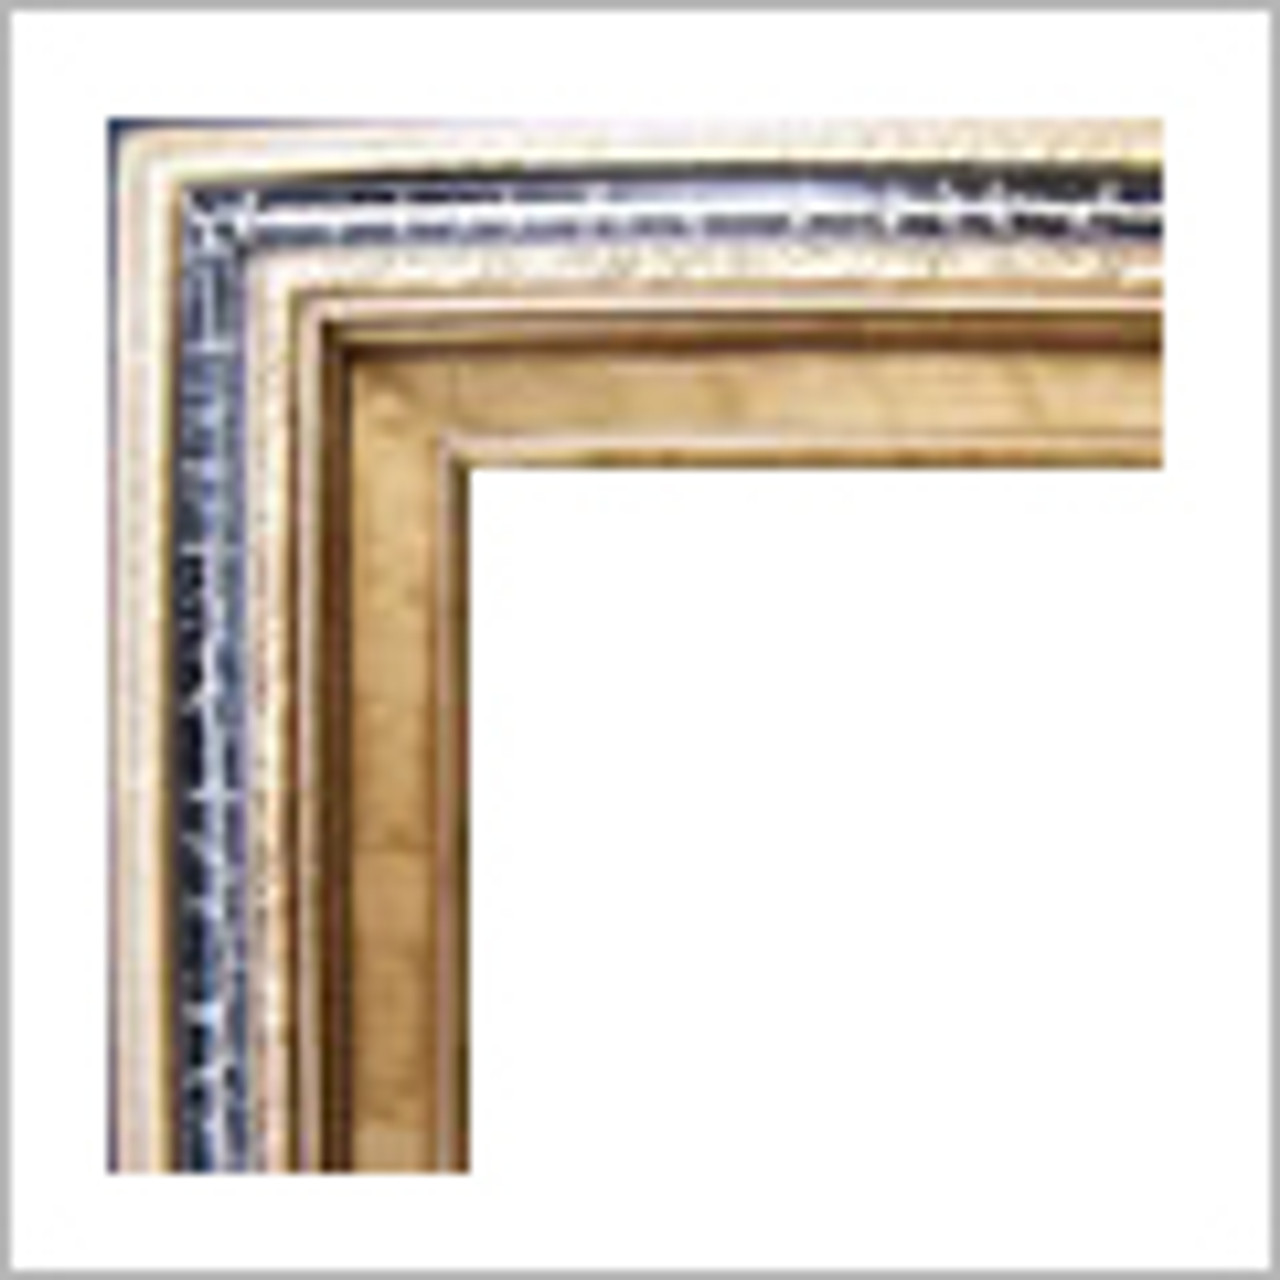  3 Inch Deluxe Wood Frames: 6X12*